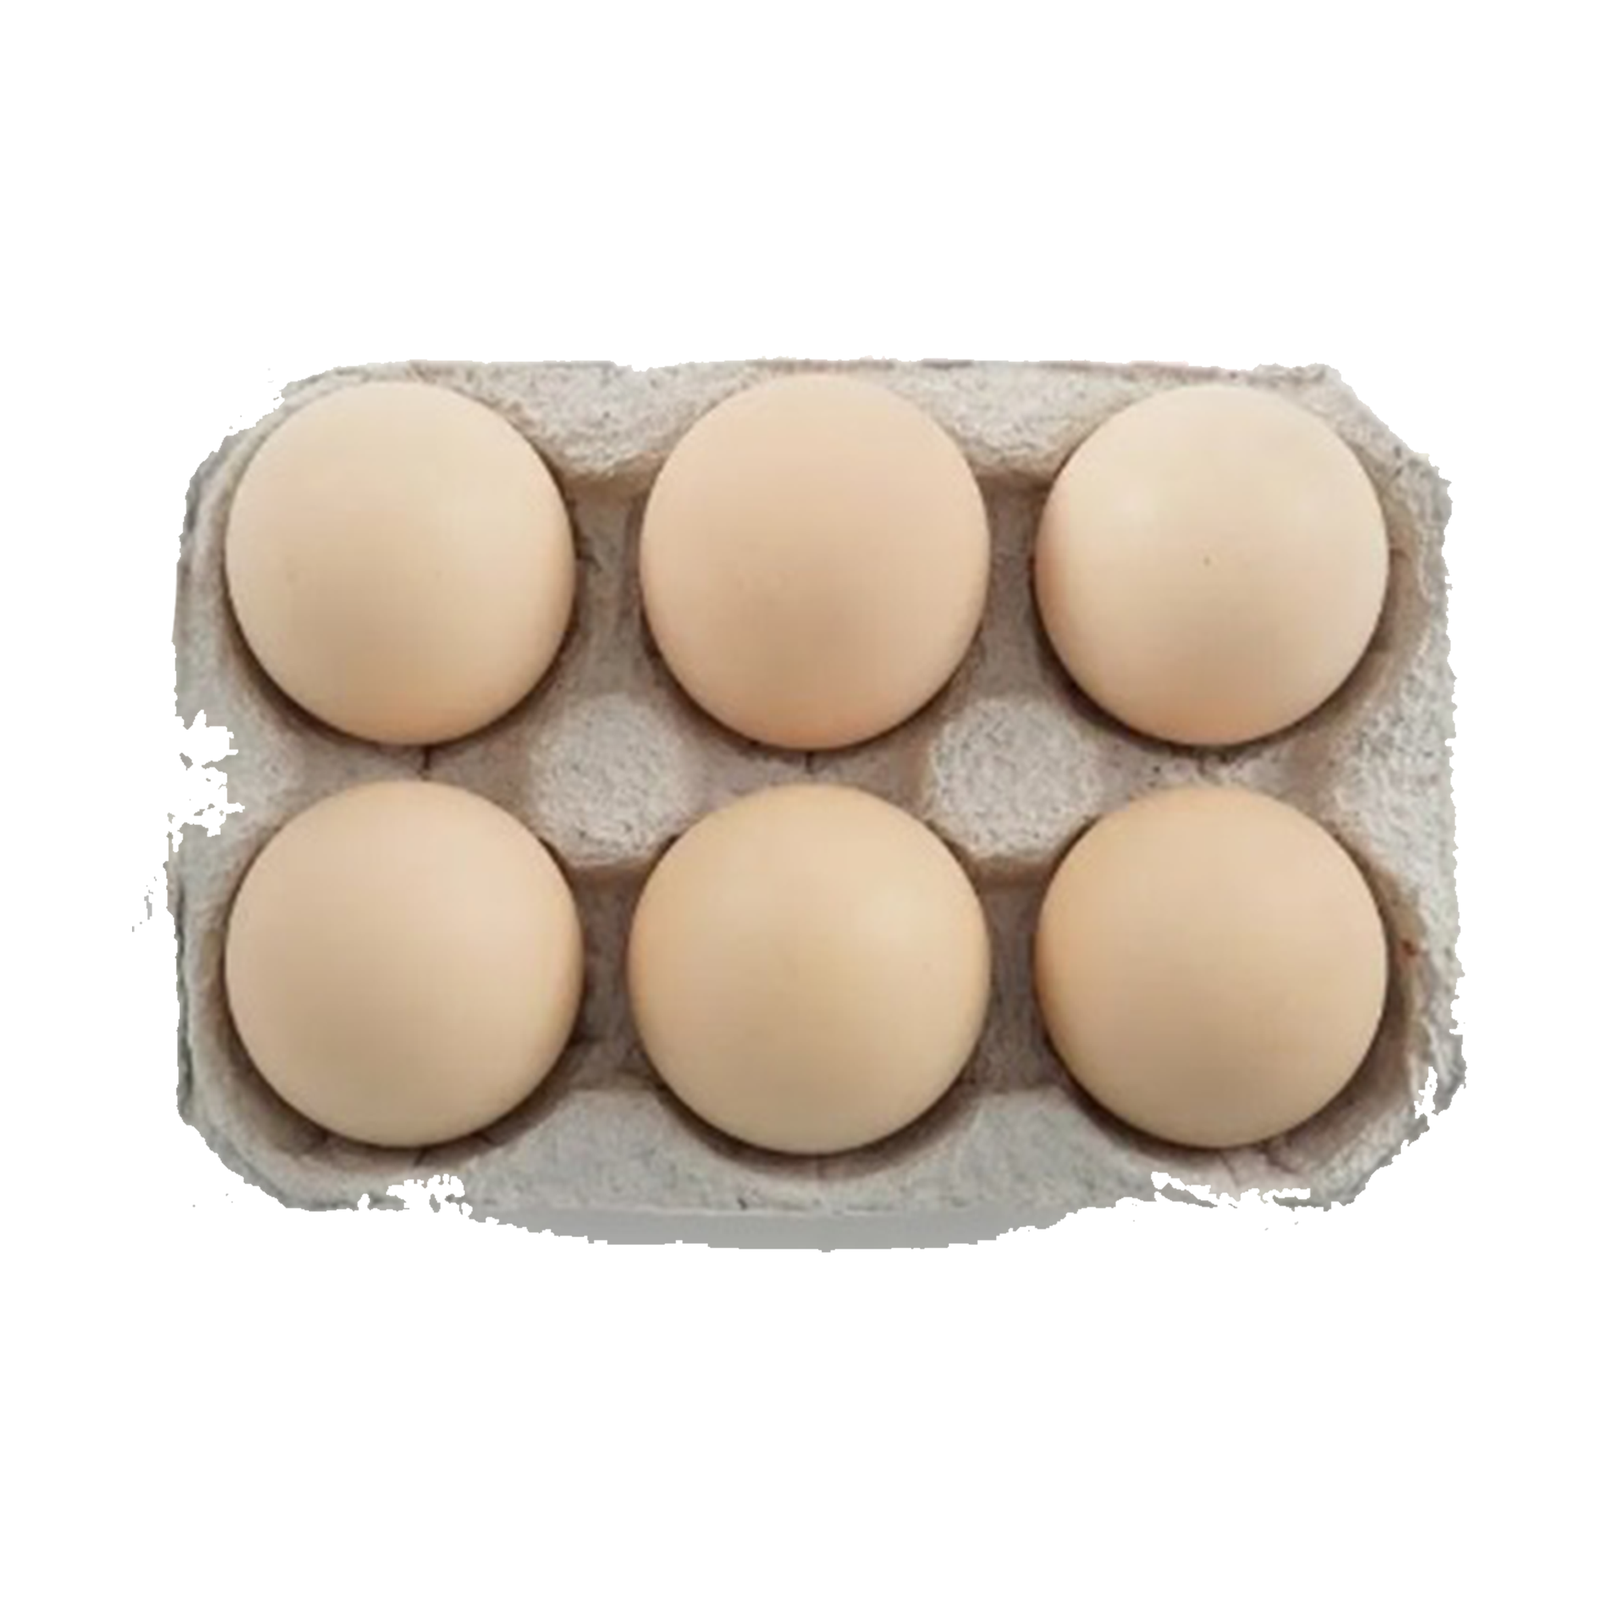 Healthy Daily Country/desi Eggs 6 pcs